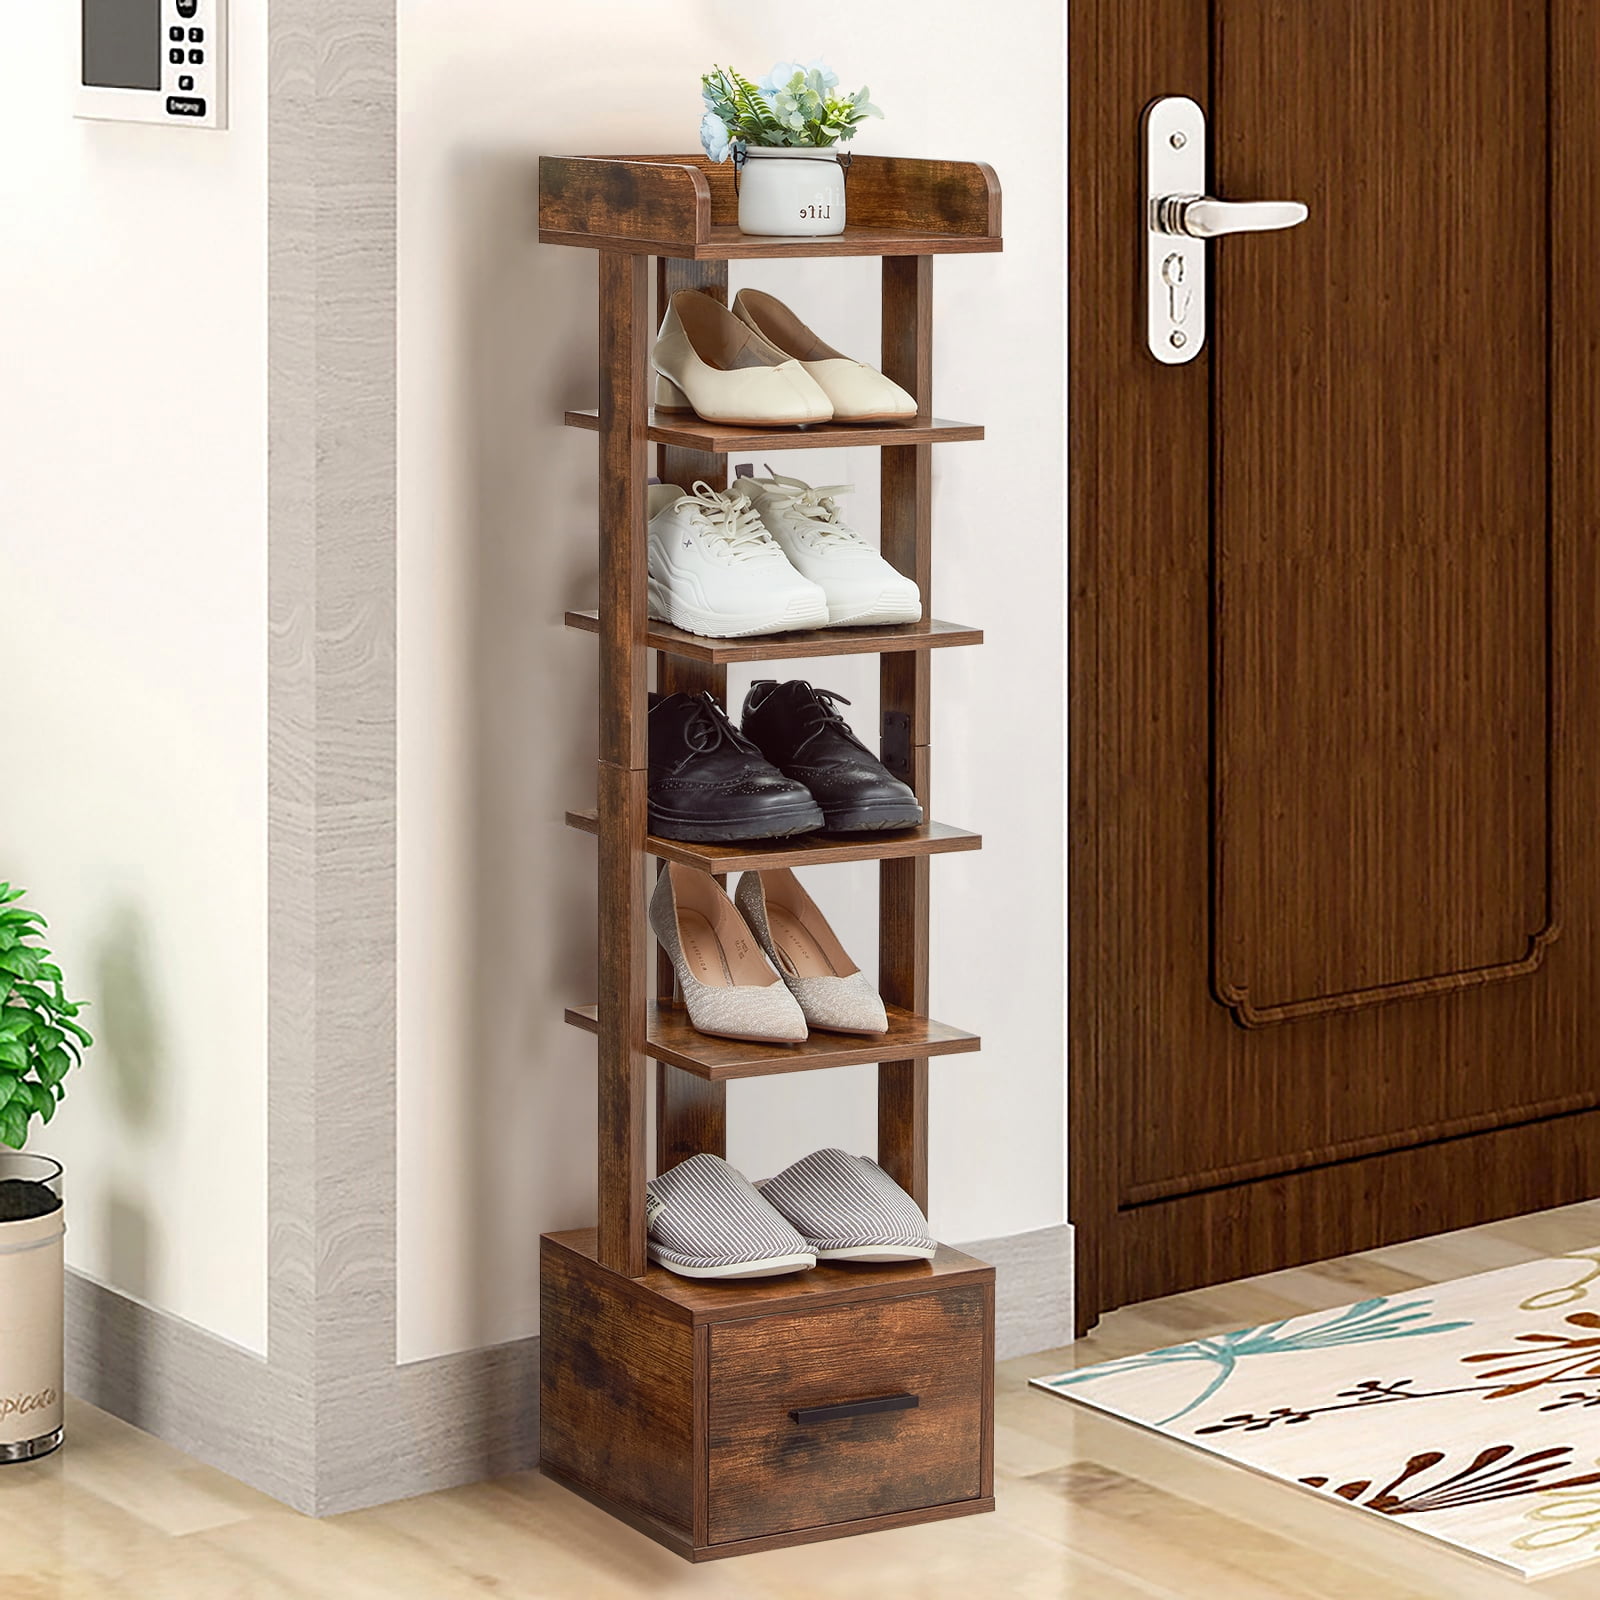 USIKEY 6 Tiers Vertical Shoe Rack,Space Saving Shoe Tower, Shoes